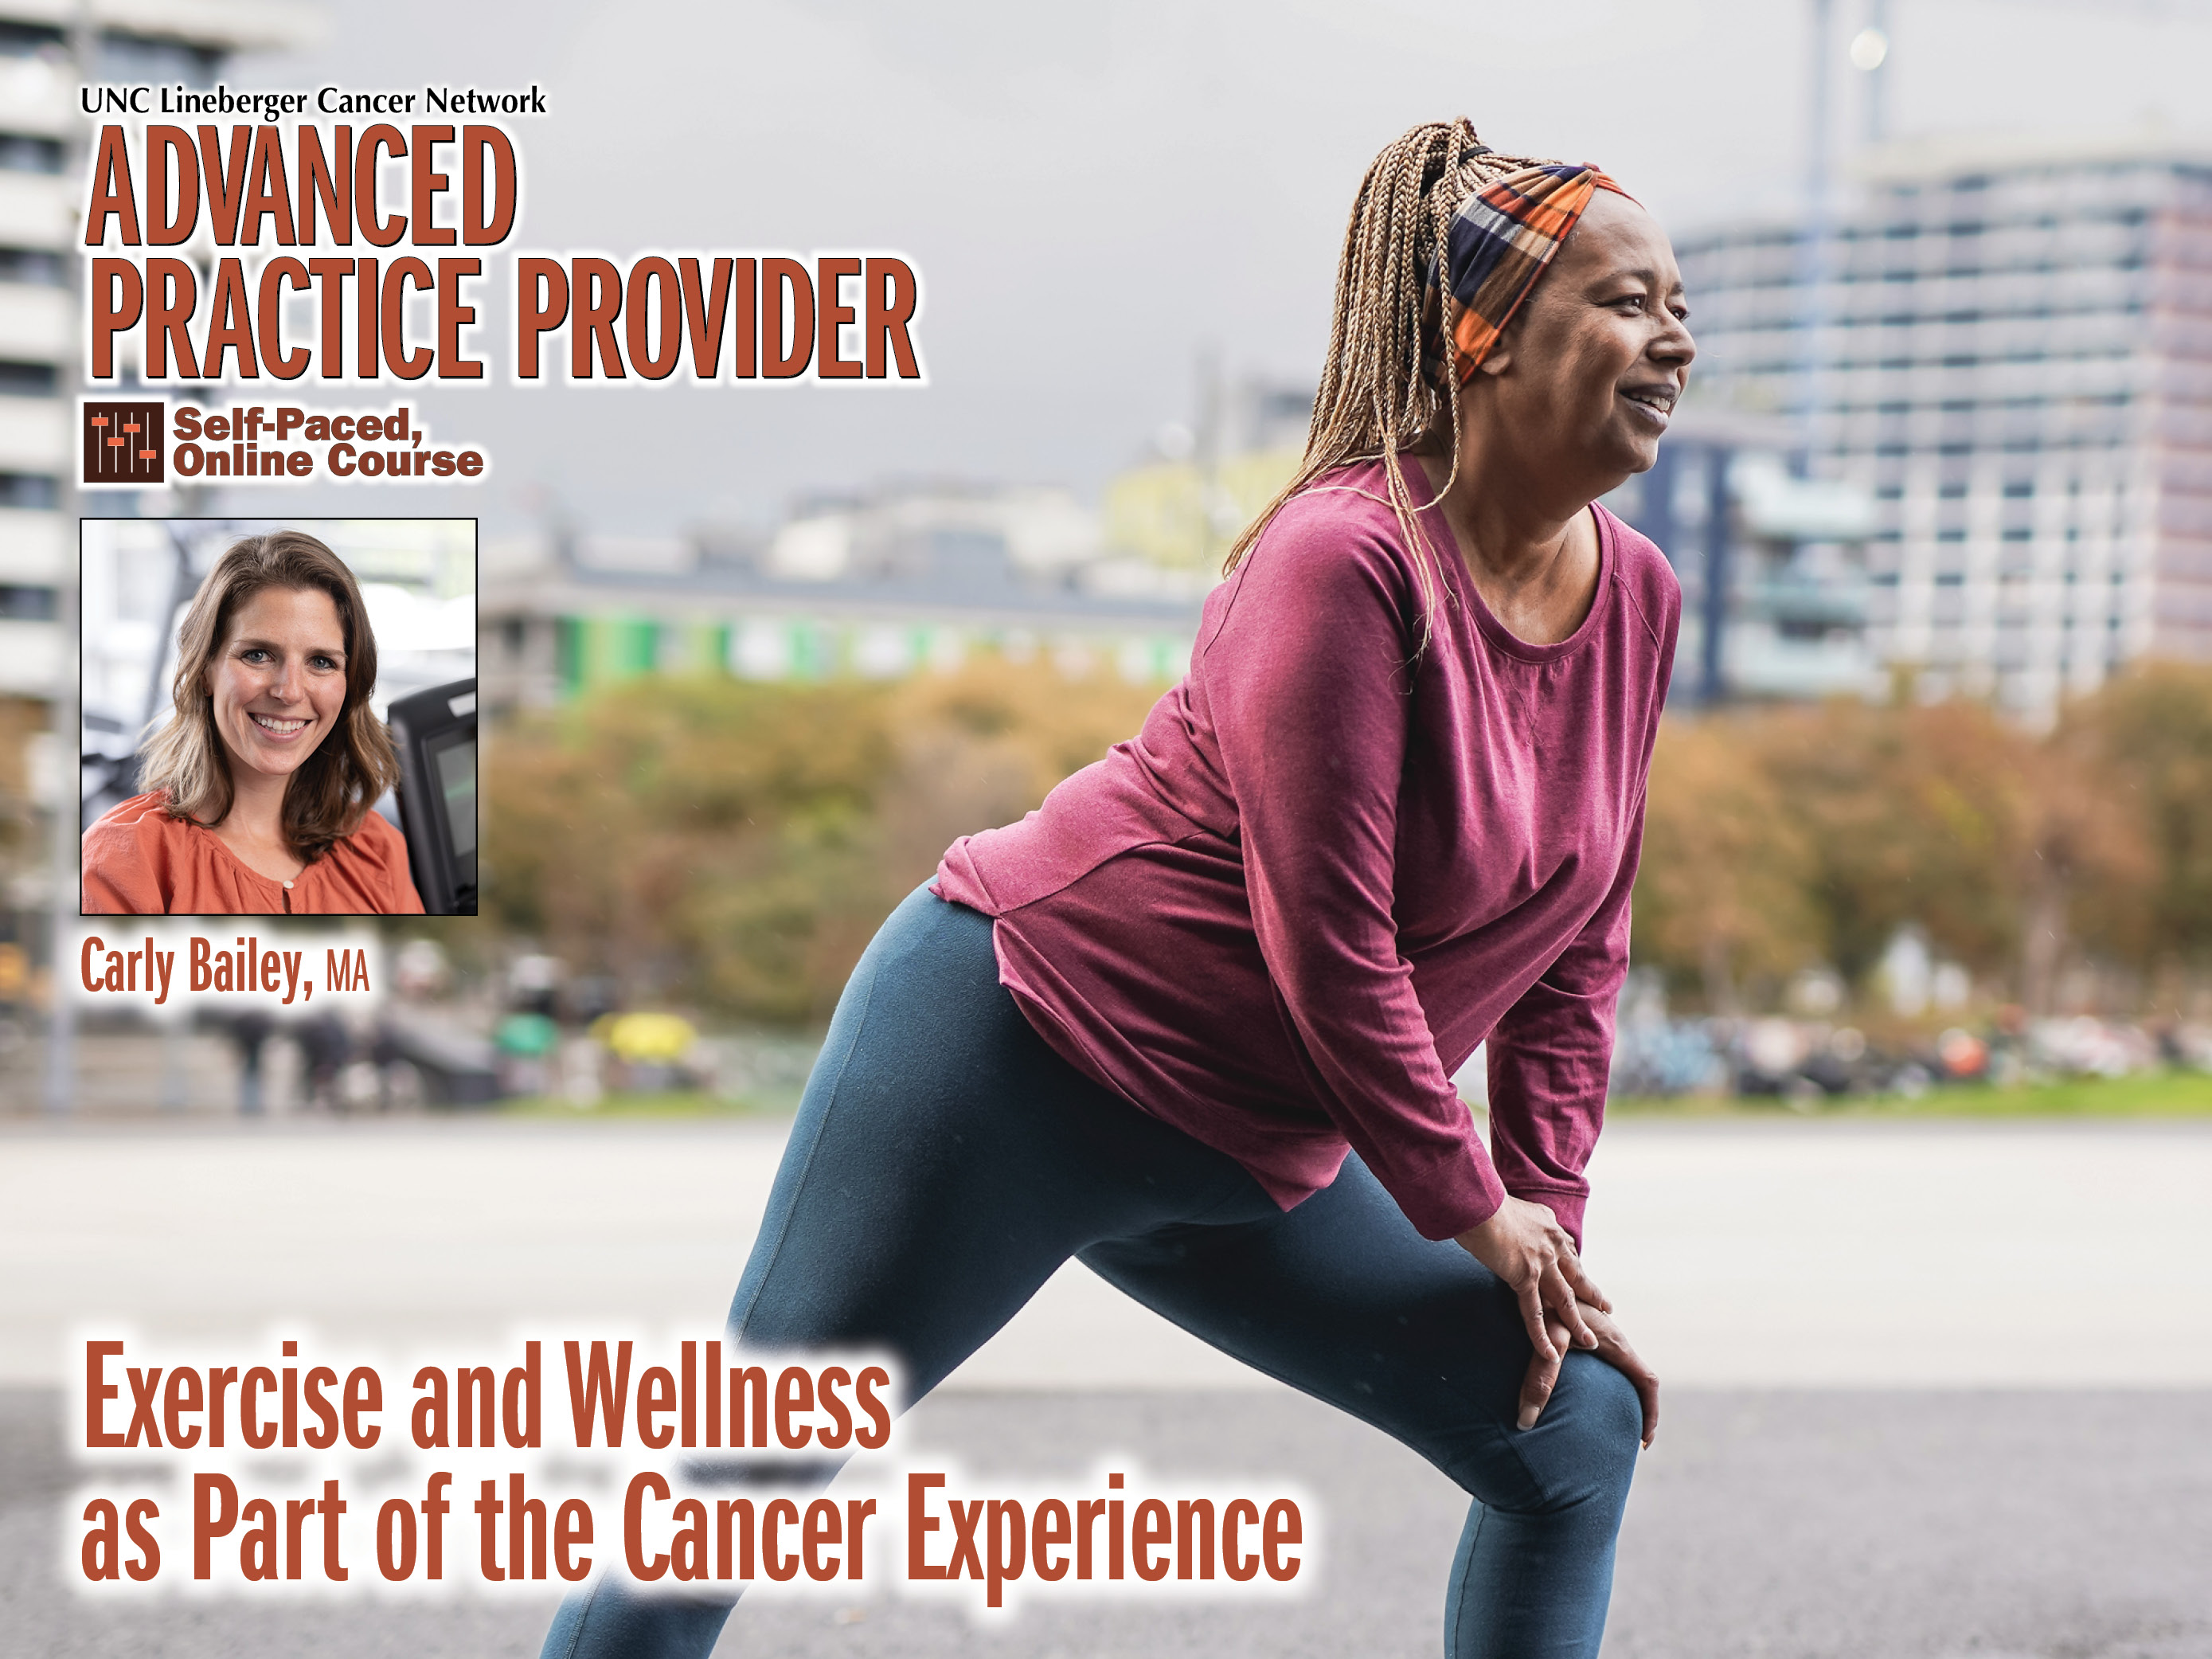 Exercise and Wellness as Part of the Cancer Experience